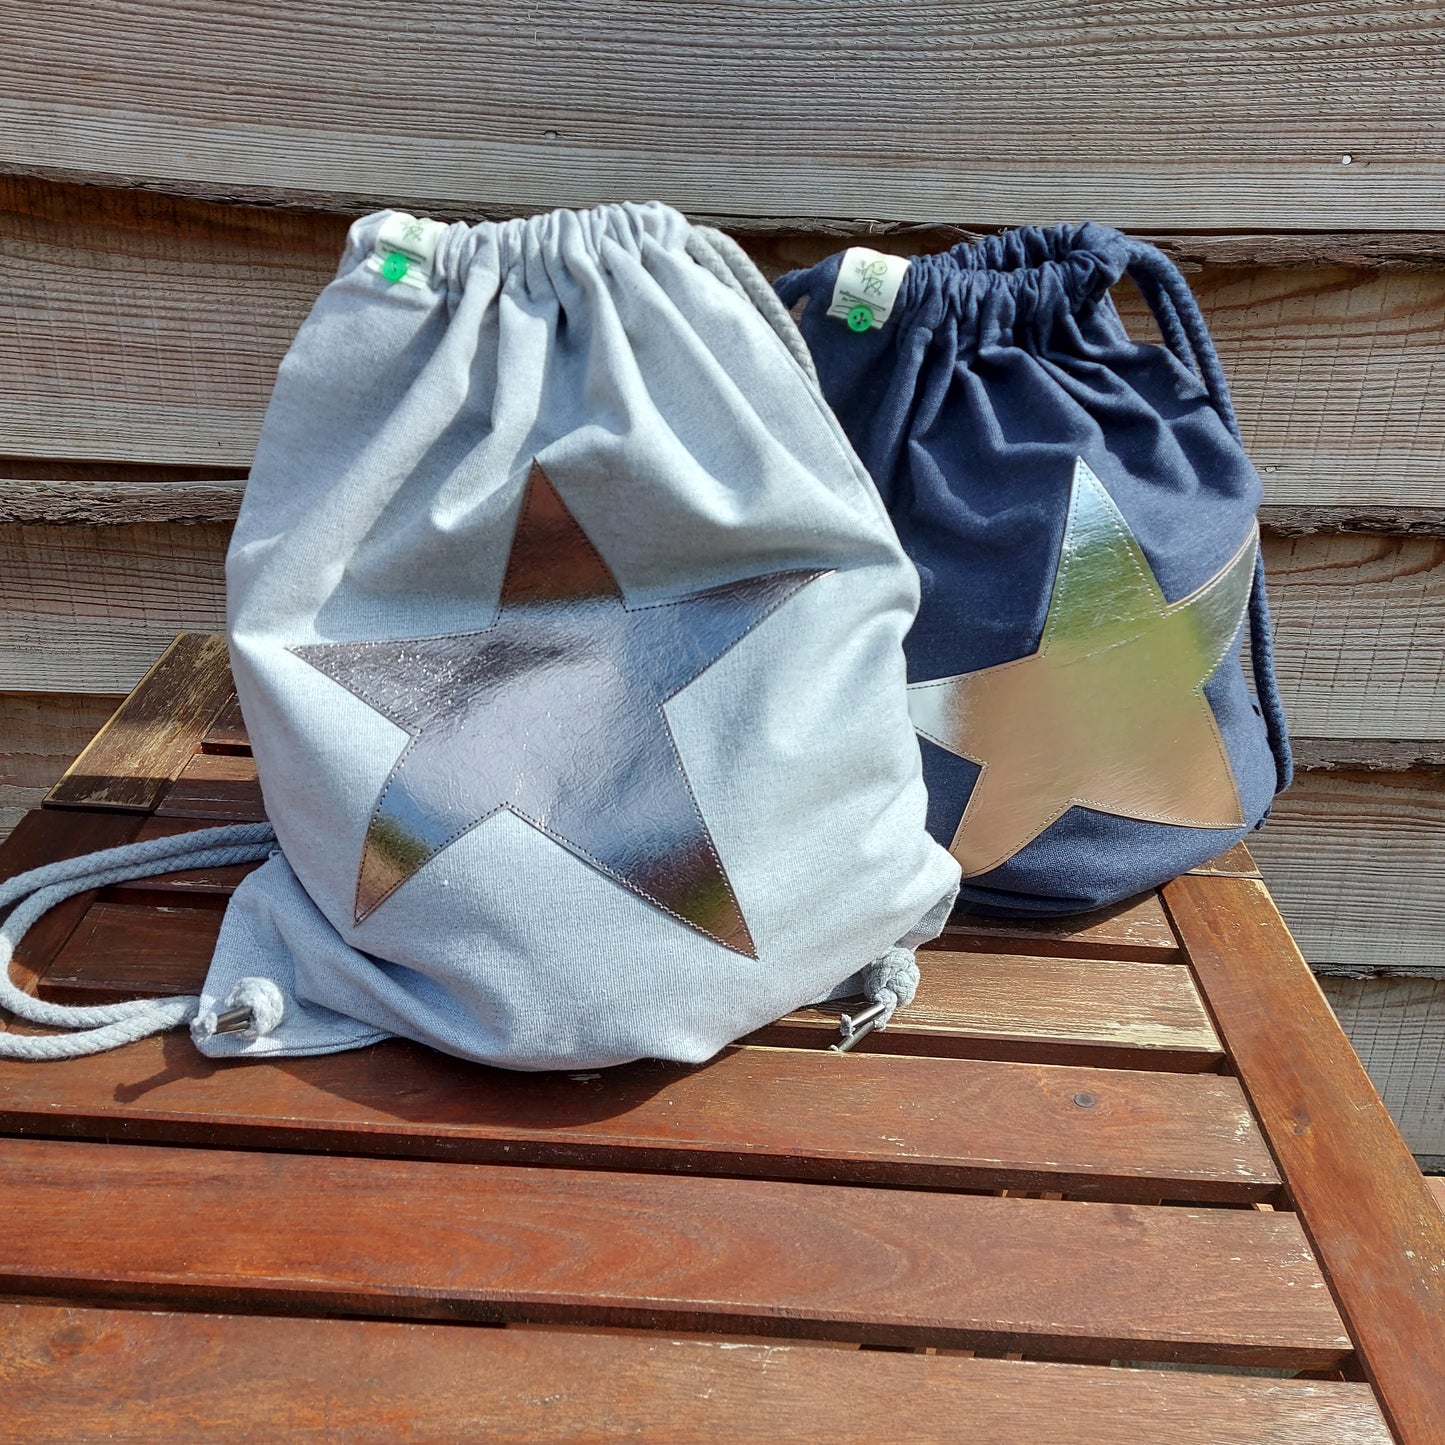 STRONG RECYCLED KIT BAG